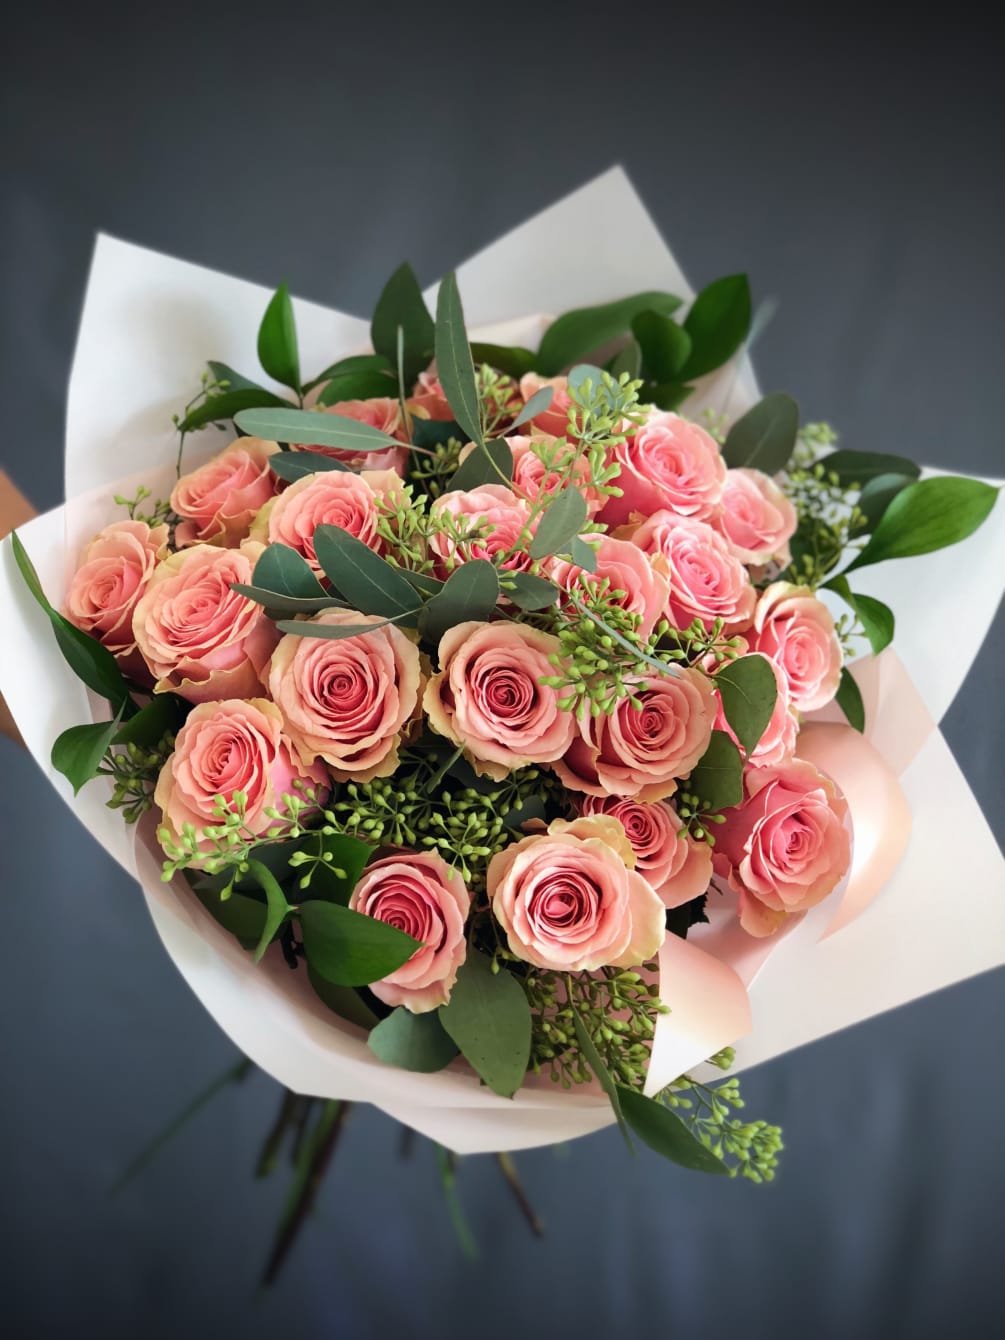 Two Dozen Pink Roses WITH WRAPPING PAPER. Bouquets do not come with